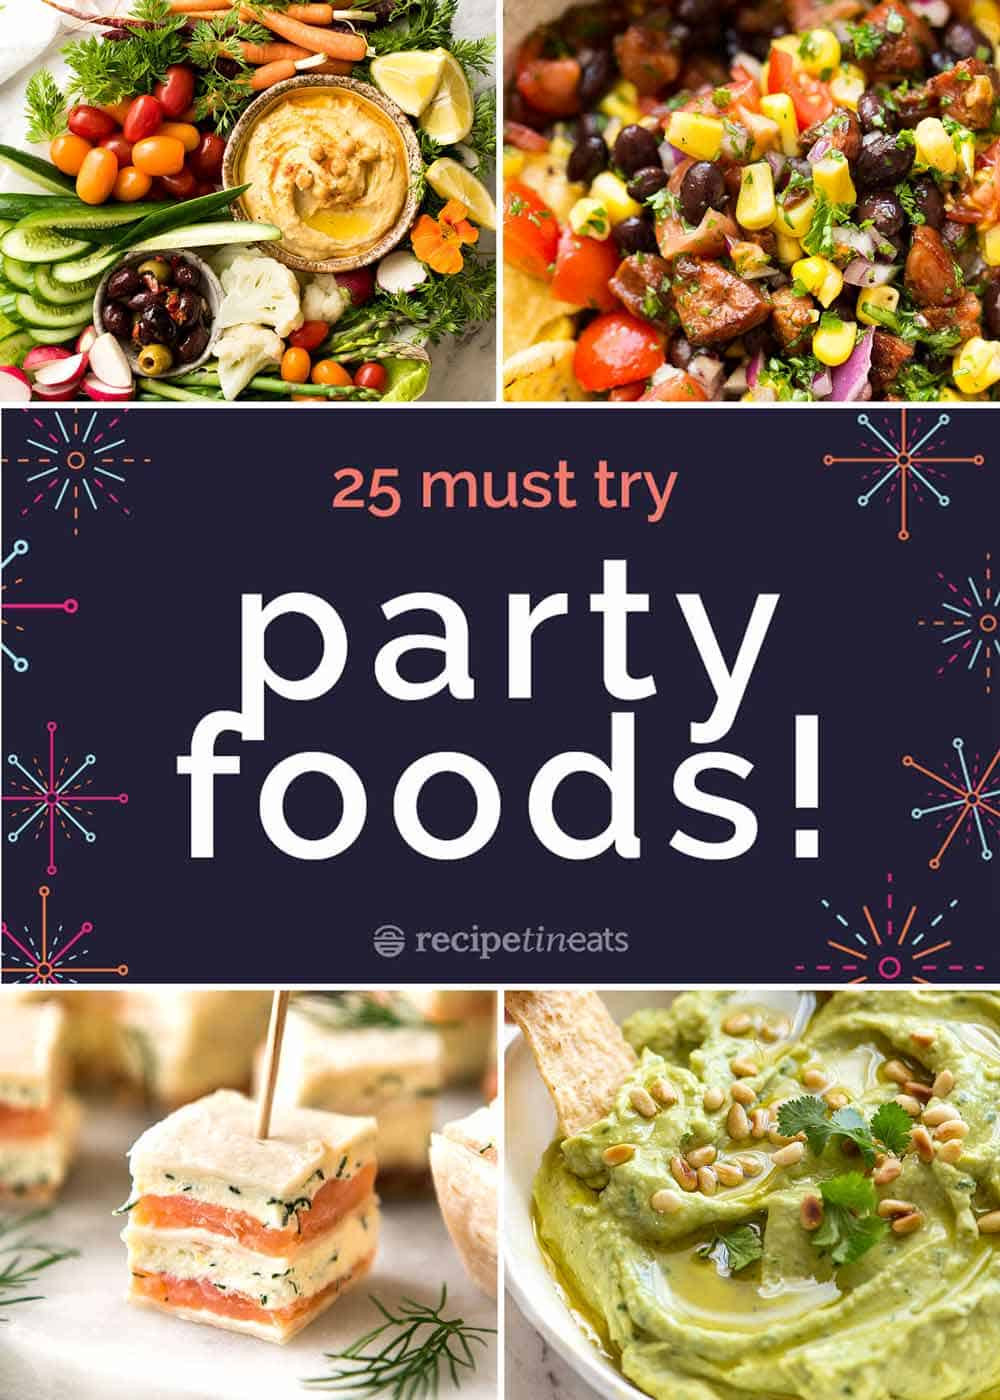 Hot Party Food Ideas
 25 BEST Party Food Recipes